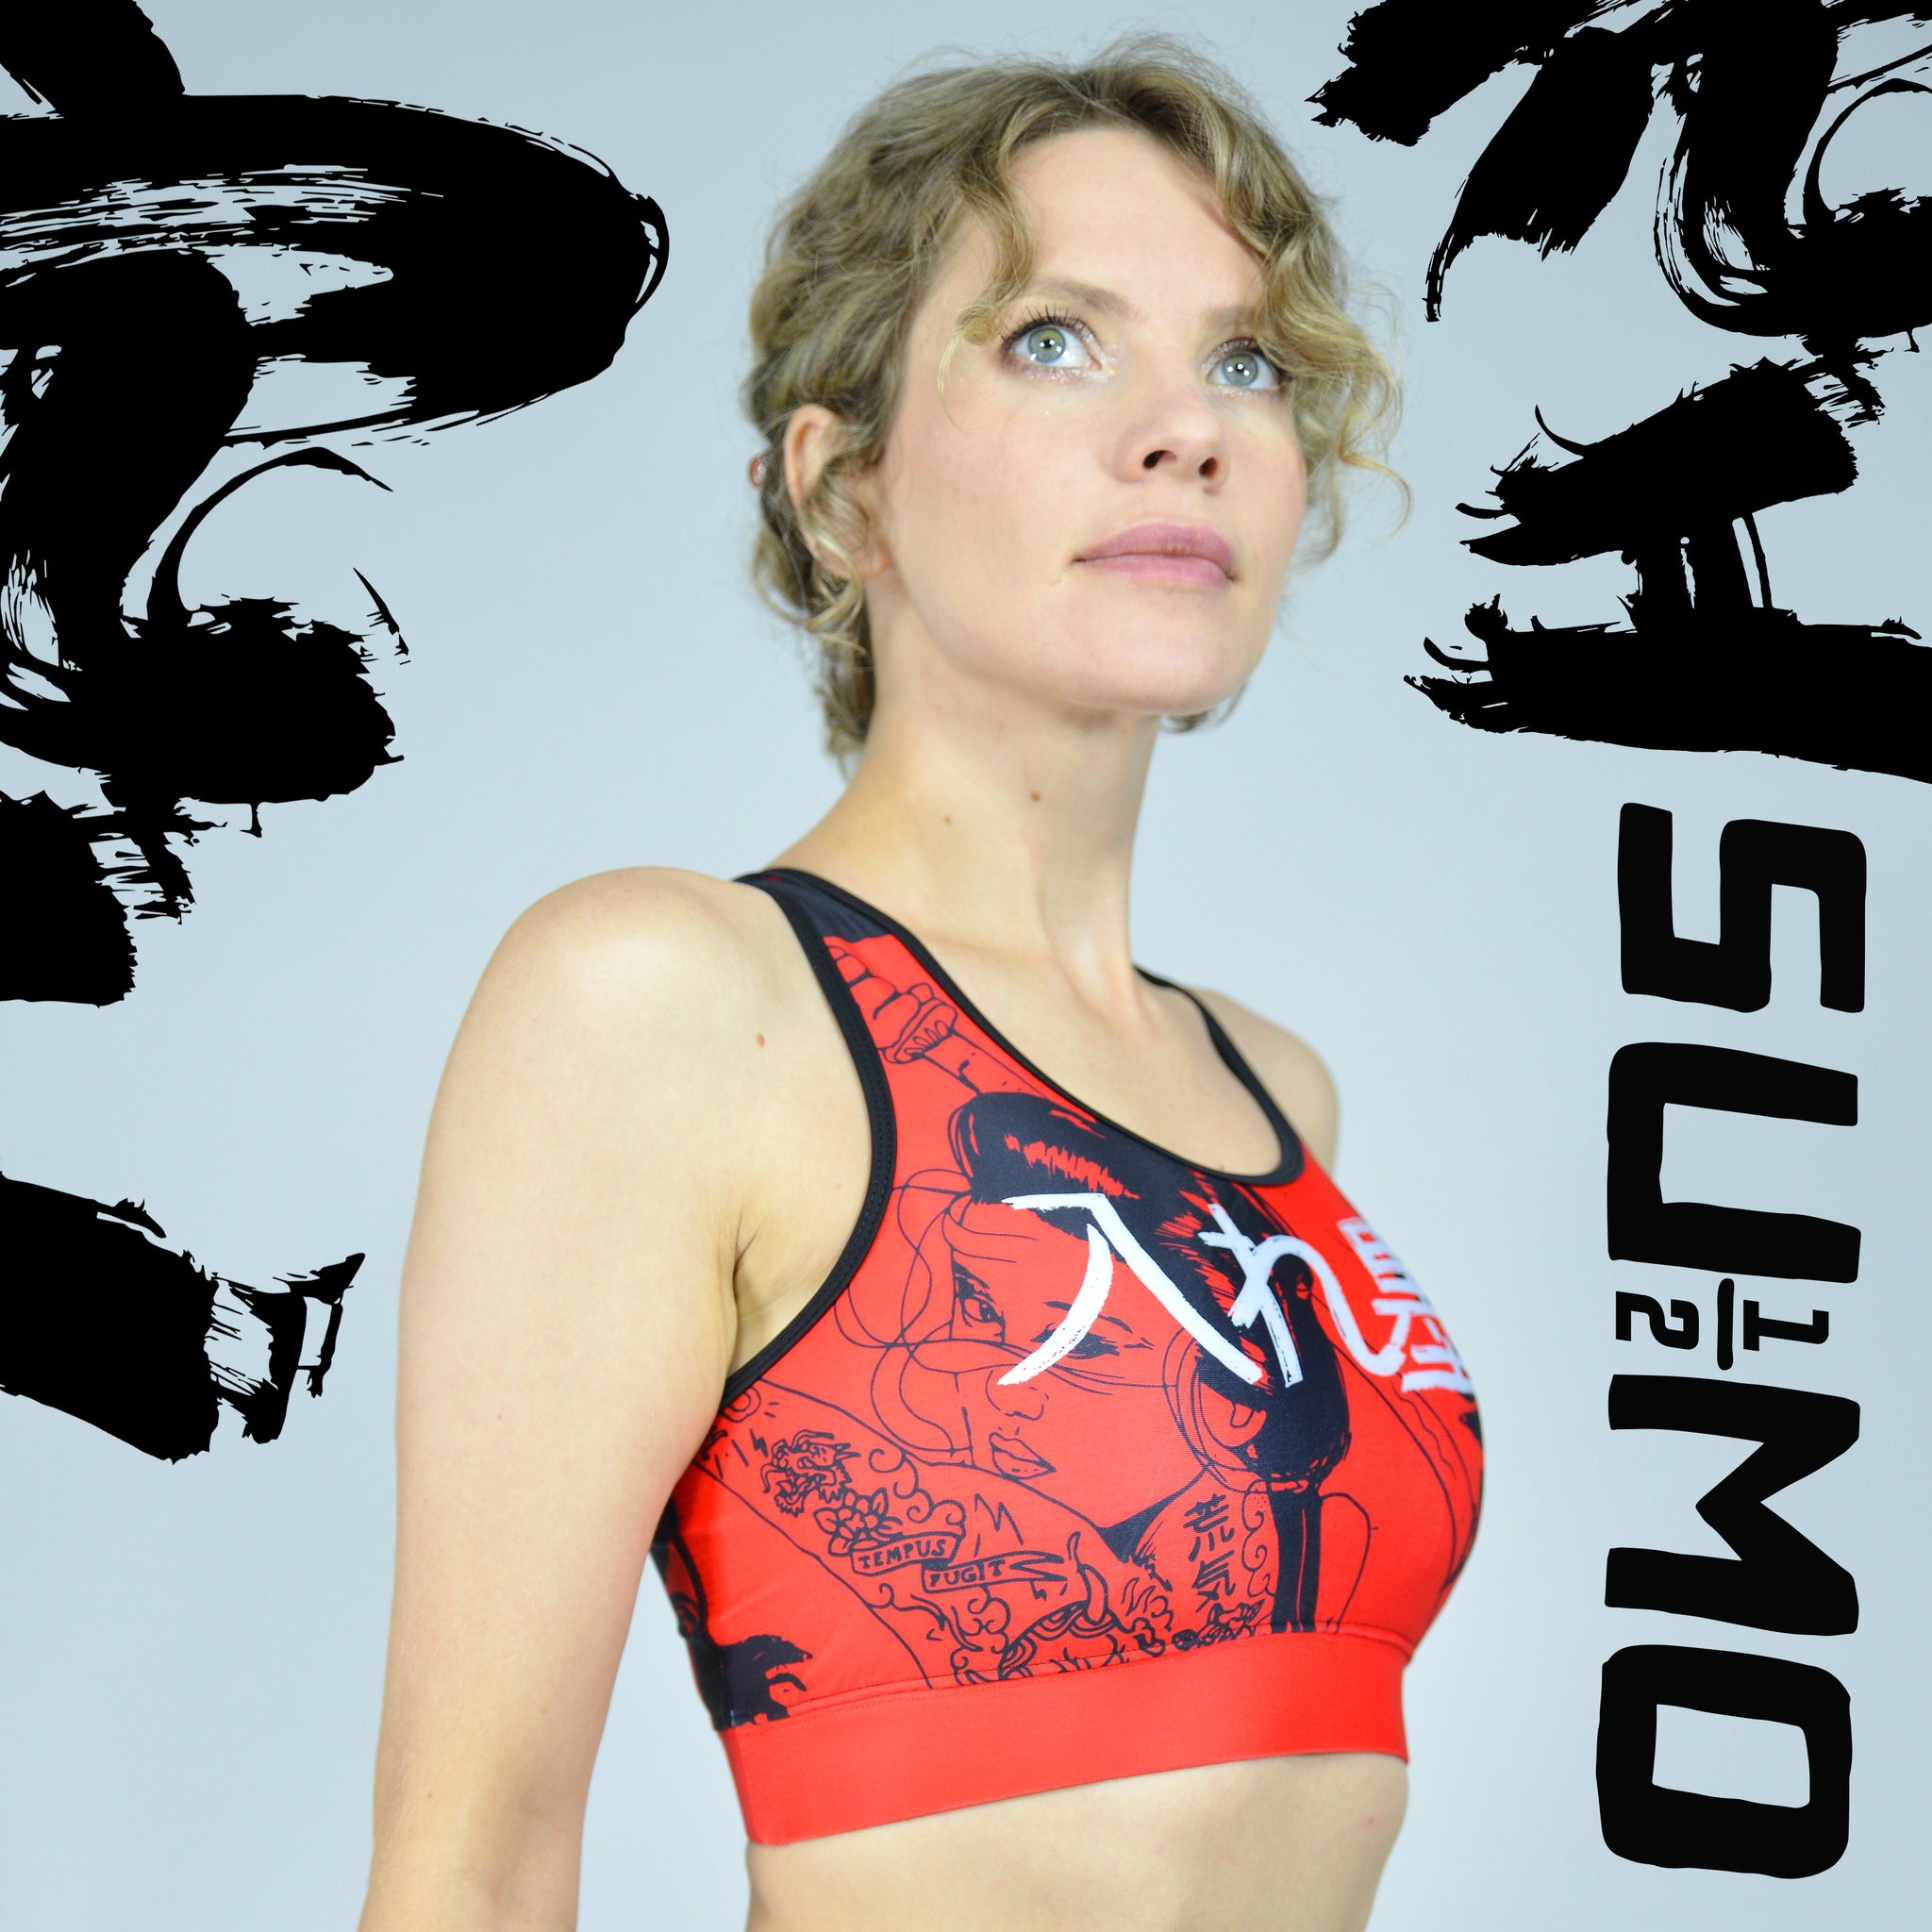 Onna Red Sports Bra for Women